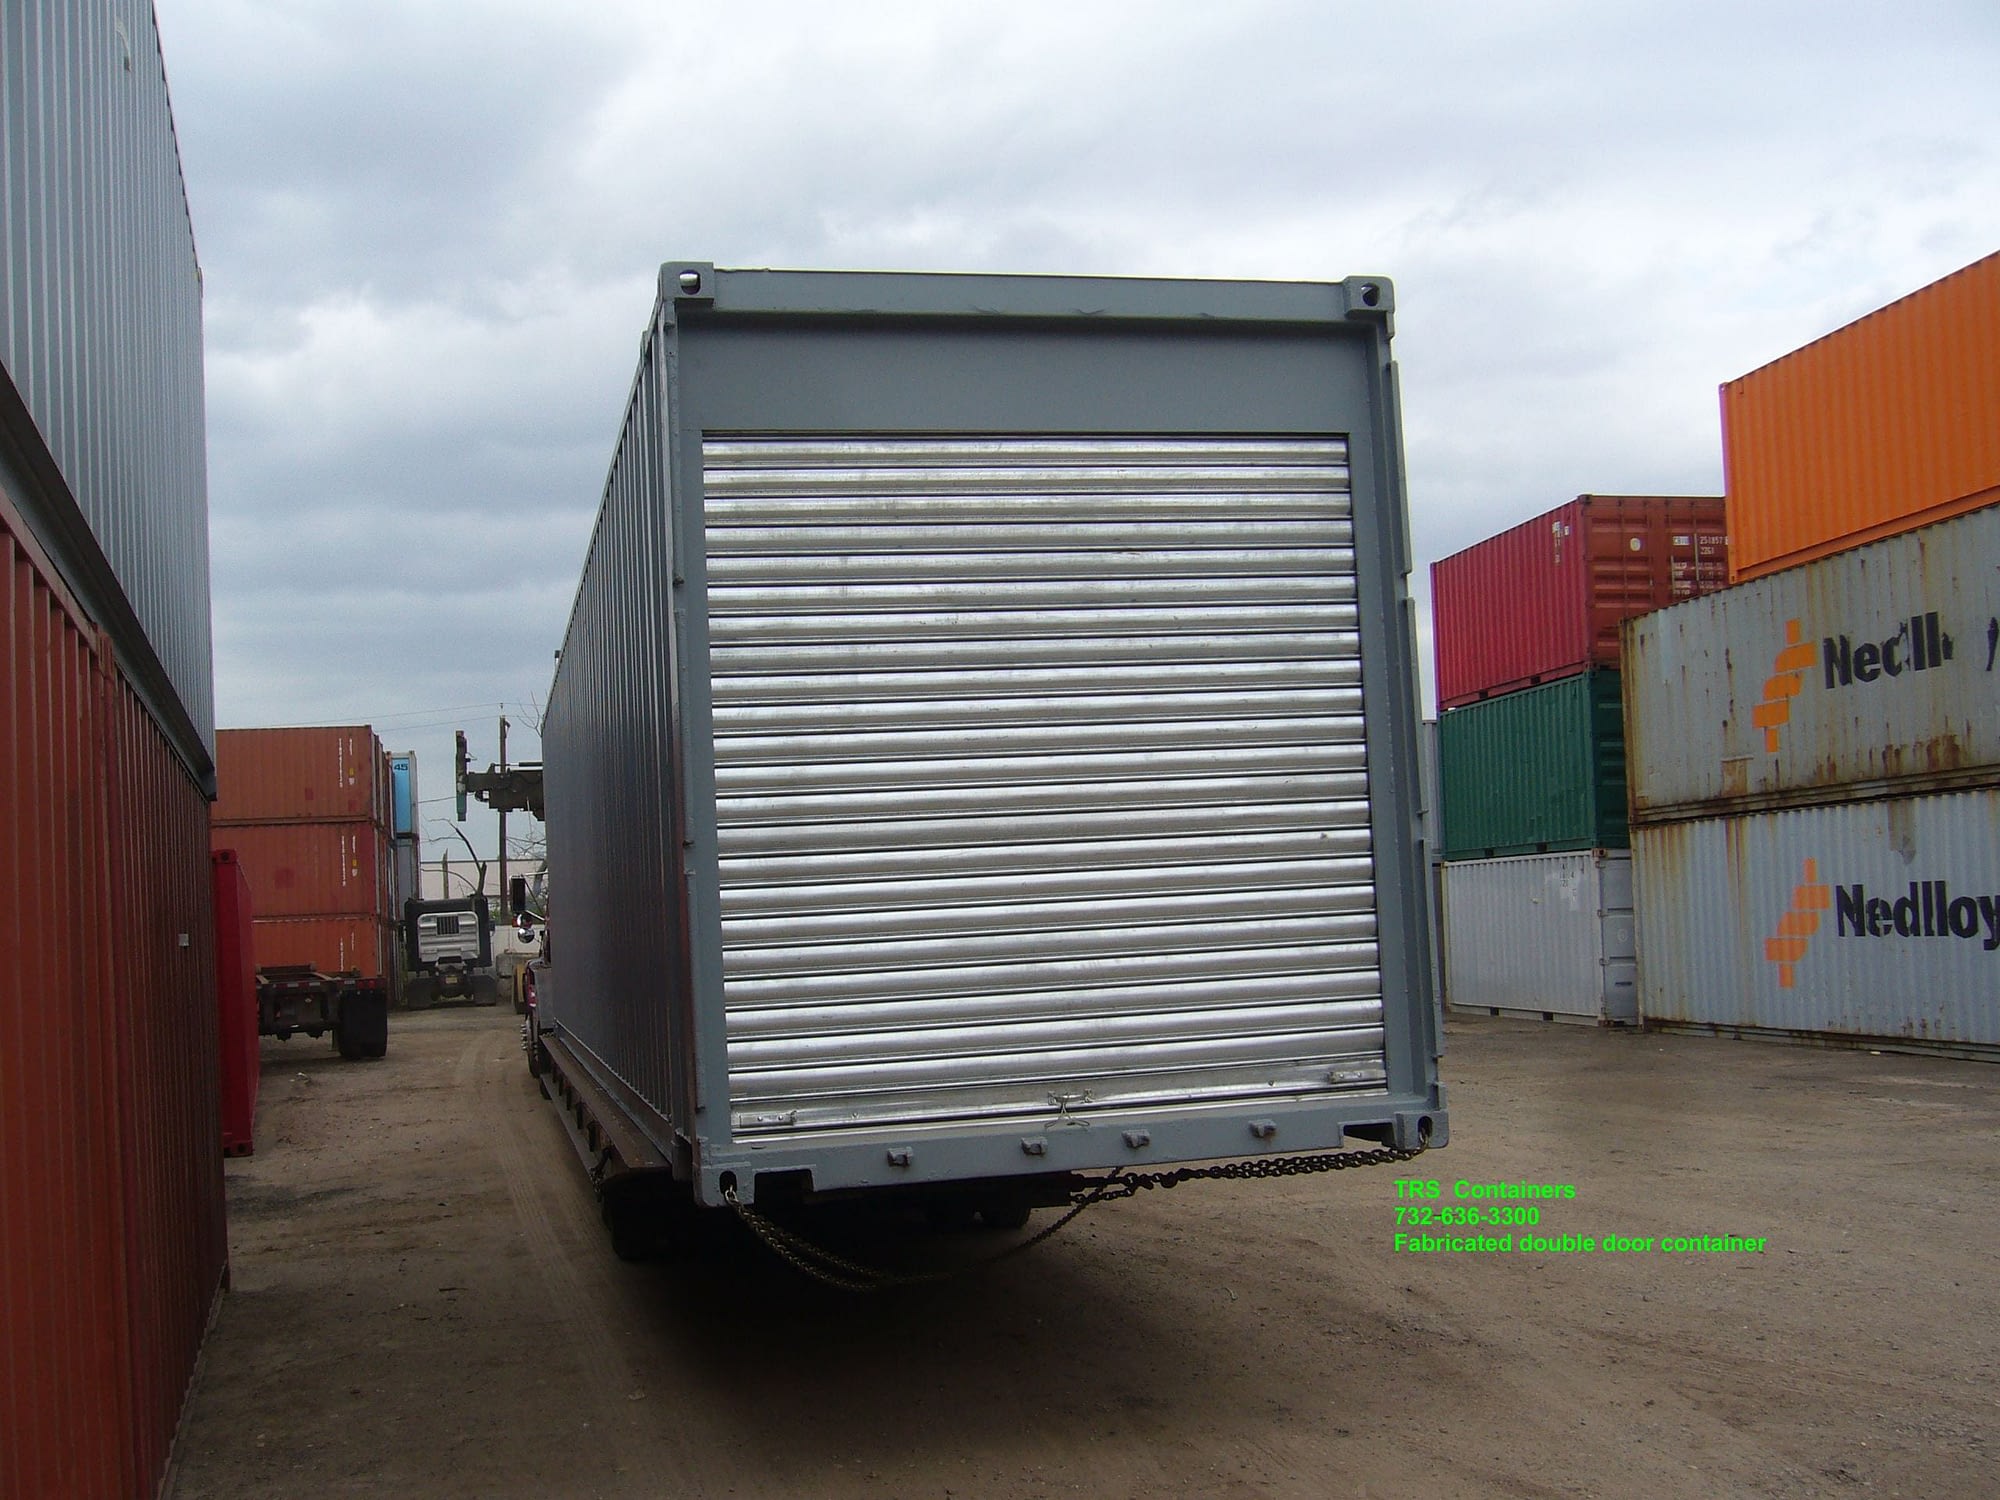 TRS Containers removes swing doors, welds in plate and installs roll up doors